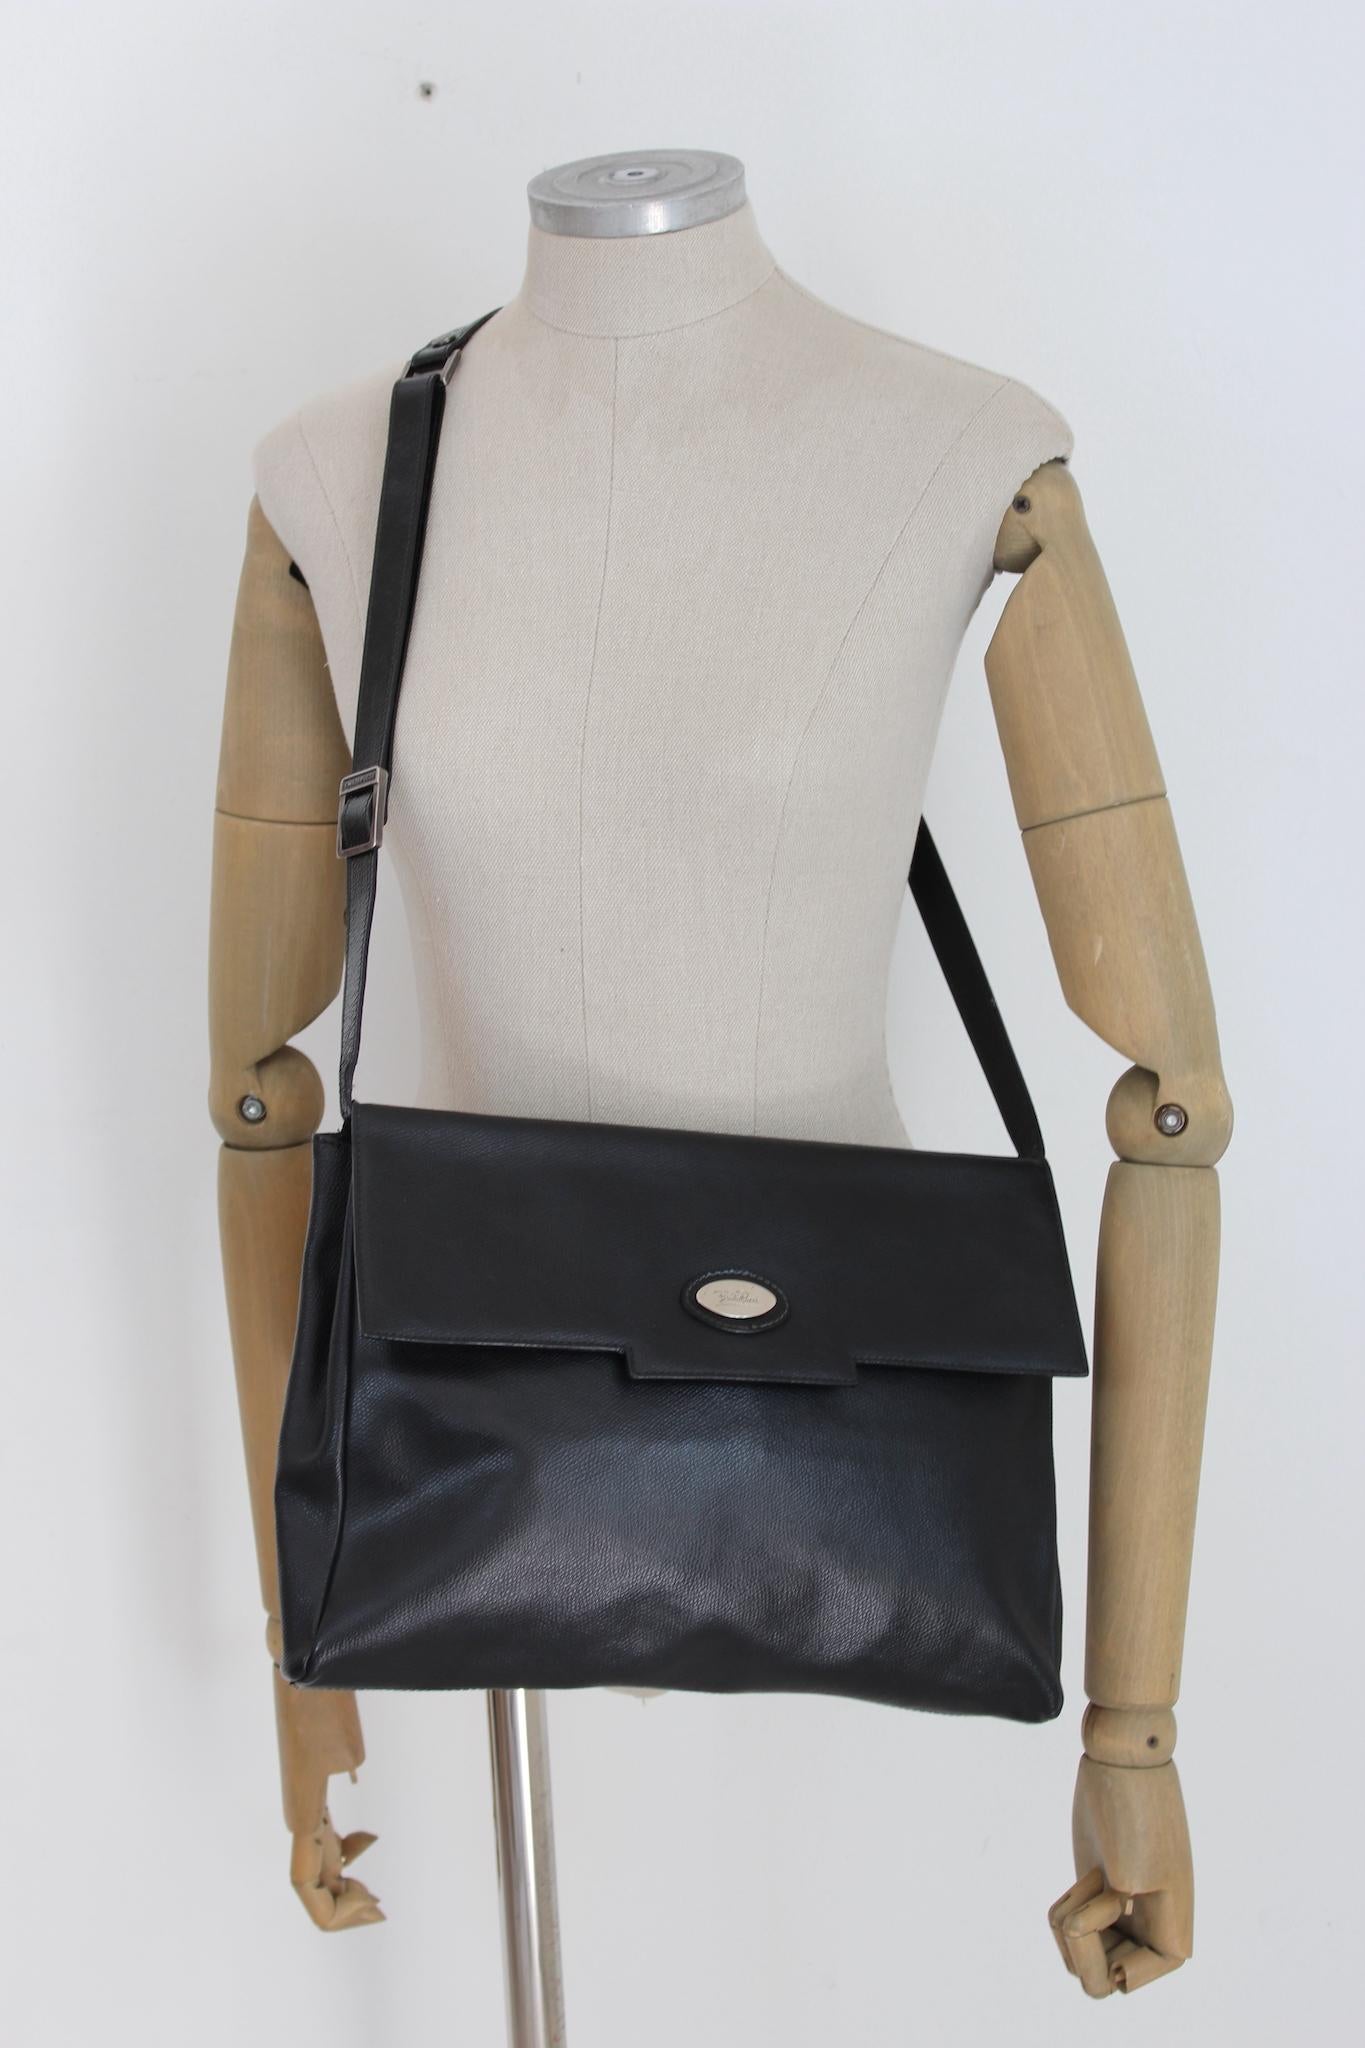 Emilio Pucci vintage 80s shoulder bag. Black color with silver details, textured leather fabric. Adjustable shoulder strap, internally lined in cotton with pocket. Made in Italy.

Reference code: 7536

Height: 25 cm
Width: 34 cm
Depth: 6 cm
Shoulder